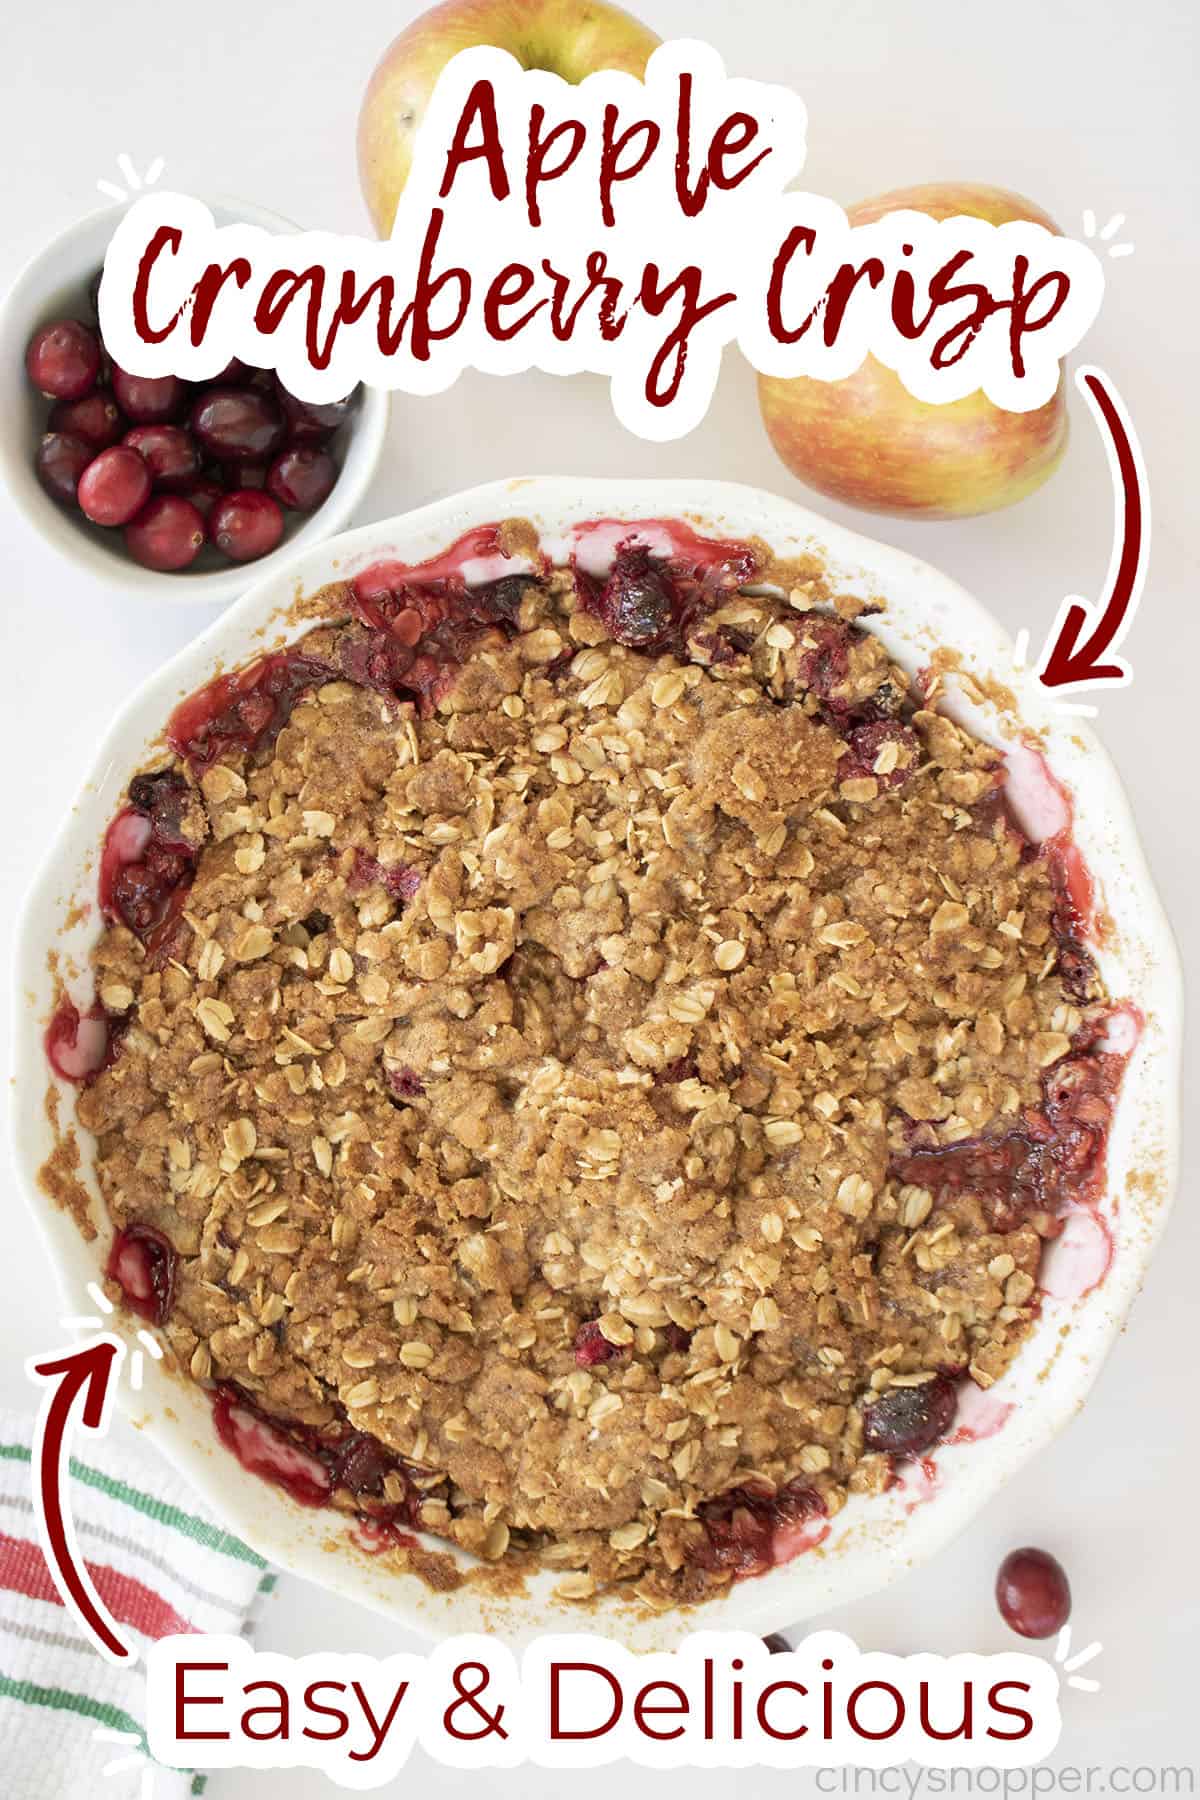 Text on image Apple Cranberry Crisp Easy & Delicious.